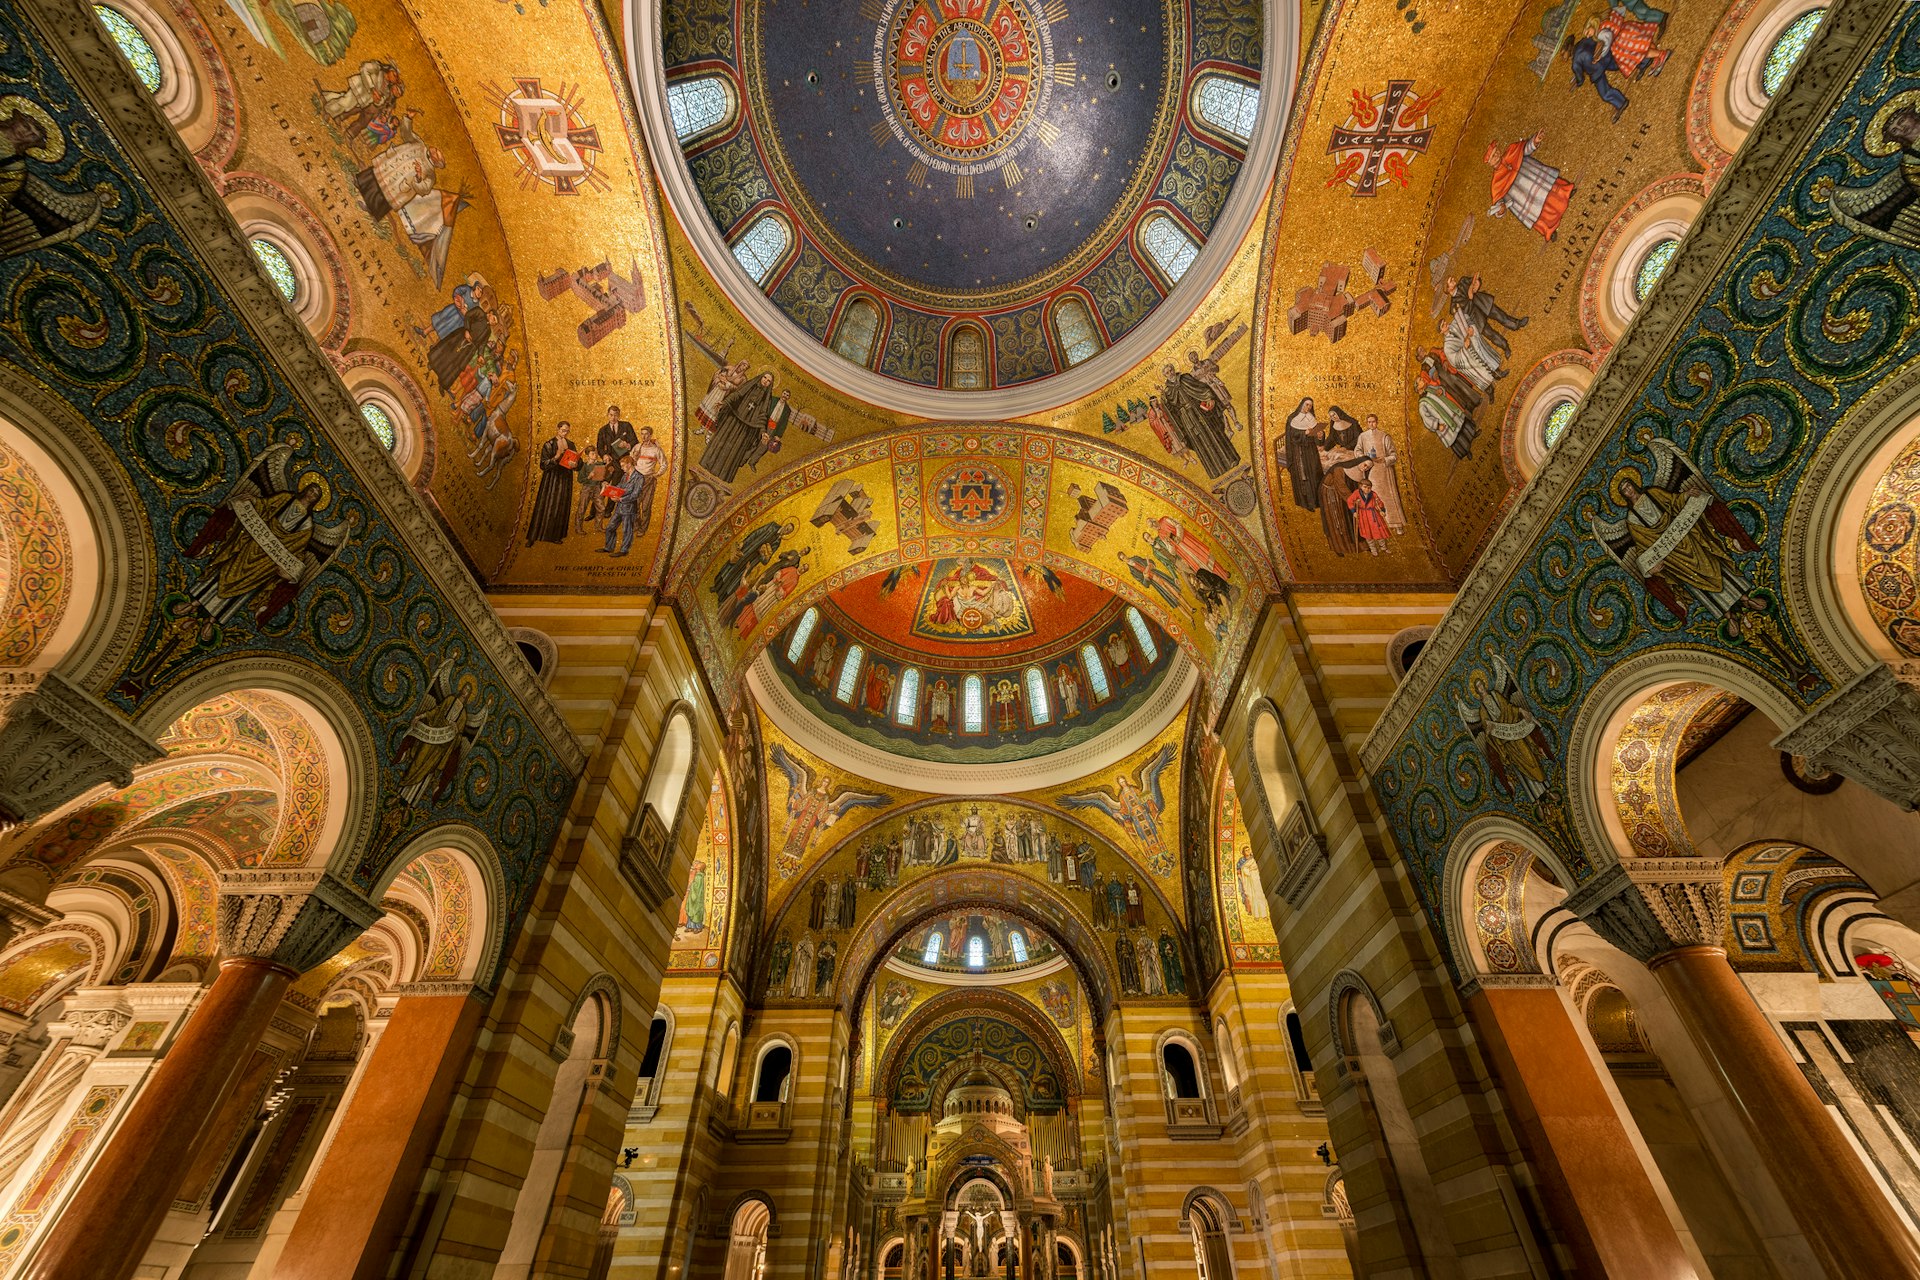 Mosaics in the Cathedral Basilica of Saint Louis